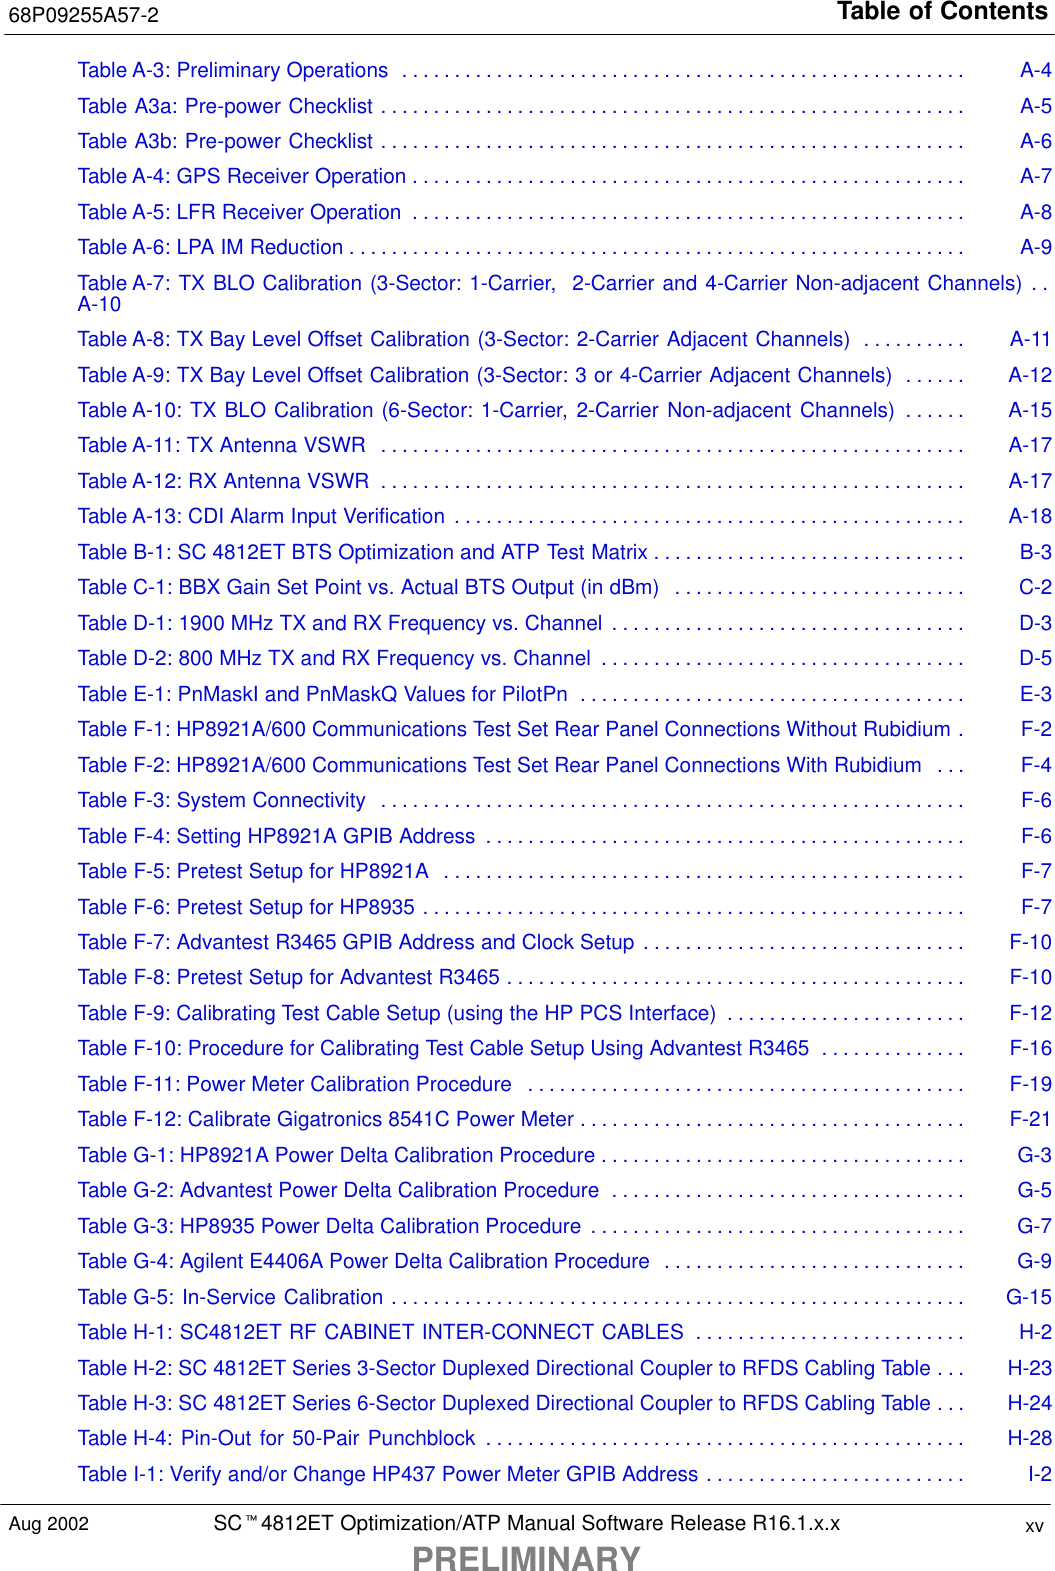 Table of Contents68P09255A57-2SCt4812ET Optimization/ATP Manual Software Release R16.1.x.xPRELIMINARYxvAug 2002Table A-3: Preliminary Operations A-4. . . . . . . . . . . . . . . . . . . . . . . . . . . . . . . . . . . . . . . . . . . . . . . . . . . . . . Table A3a: Pre-power Checklist A-5. . . . . . . . . . . . . . . . . . . . . . . . . . . . . . . . . . . . . . . . . . . . . . . . . . . . . . . . Table A3b: Pre-power Checklist A-6. . . . . . . . . . . . . . . . . . . . . . . . . . . . . . . . . . . . . . . . . . . . . . . . . . . . . . . . Table A-4: GPS Receiver Operation A-7. . . . . . . . . . . . . . . . . . . . . . . . . . . . . . . . . . . . . . . . . . . . . . . . . . . . . Table A-5: LFR Receiver Operation A-8. . . . . . . . . . . . . . . . . . . . . . . . . . . . . . . . . . . . . . . . . . . . . . . . . . . . . Table A-6: LPA IM Reduction A-9. . . . . . . . . . . . . . . . . . . . . . . . . . . . . . . . . . . . . . . . . . . . . . . . . . . . . . . . . . . Table A-7: TX BLO Calibration (3-Sector: 1-Carrier,  2-Carrier and 4-Carrier Non-adjacent Channels) . . A-10Table A-8: TX Bay Level Offset Calibration (3-Sector: 2-Carrier Adjacent Channels) A-11. . . . . . . . . . Table A-9: TX Bay Level Offset Calibration (3-Sector: 3 or 4-Carrier Adjacent Channels) A-12. . . . . . Table A-10: TX BLO Calibration (6-Sector: 1-Carrier, 2-Carrier Non-adjacent Channels) A-15. . . . . . Table A-11: TX Antenna VSWR A-17. . . . . . . . . . . . . . . . . . . . . . . . . . . . . . . . . . . . . . . . . . . . . . . . . . . . . . . . Table A-12: RX Antenna VSWR A-17. . . . . . . . . . . . . . . . . . . . . . . . . . . . . . . . . . . . . . . . . . . . . . . . . . . . . . . . Table A-13: CDI Alarm Input Verification A-18. . . . . . . . . . . . . . . . . . . . . . . . . . . . . . . . . . . . . . . . . . . . . . . . . Table B-1: SC 4812ET BTS Optimization and ATP Test Matrix B-3. . . . . . . . . . . . . . . . . . . . . . . . . . . . . . Table C-1: BBX Gain Set Point vs. Actual BTS Output (in dBm) C-2. . . . . . . . . . . . . . . . . . . . . . . . . . . . Table D-1: 1900 MHz TX and RX Frequency vs. Channel D-3. . . . . . . . . . . . . . . . . . . . . . . . . . . . . . . . . . Table D-2: 800 MHz TX and RX Frequency vs. Channel D-5. . . . . . . . . . . . . . . . . . . . . . . . . . . . . . . . . . . Table E-1: PnMaskI and PnMaskQ Values for PilotPn E-3. . . . . . . . . . . . . . . . . . . . . . . . . . . . . . . . . . . . . Table F-1: HP8921A/600 Communications Test Set Rear Panel Connections Without Rubidium F-2. Table F-2: HP8921A/600 Communications Test Set Rear Panel Connections With Rubidium F-4. . . Table F-3: System Connectivity F-6. . . . . . . . . . . . . . . . . . . . . . . . . . . . . . . . . . . . . . . . . . . . . . . . . . . . . . . . Table F-4: Setting HP8921A GPIB Address F-6. . . . . . . . . . . . . . . . . . . . . . . . . . . . . . . . . . . . . . . . . . . . . . Table F-5: Pretest Setup for HP8921A F-7. . . . . . . . . . . . . . . . . . . . . . . . . . . . . . . . . . . . . . . . . . . . . . . . . . Table F-6: Pretest Setup for HP8935 F-7. . . . . . . . . . . . . . . . . . . . . . . . . . . . . . . . . . . . . . . . . . . . . . . . . . . . Table F-7: Advantest R3465 GPIB Address and Clock Setup F-10. . . . . . . . . . . . . . . . . . . . . . . . . . . . . . . Table F-8: Pretest Setup for Advantest R3465 F-10. . . . . . . . . . . . . . . . . . . . . . . . . . . . . . . . . . . . . . . . . . . . Table F-9: Calibrating Test Cable Setup (using the HP PCS Interface) F-12. . . . . . . . . . . . . . . . . . . . . . . Table F-10: Procedure for Calibrating Test Cable Setup Using Advantest R3465 F-16. . . . . . . . . . . . . . Table F-11: Power Meter Calibration Procedure F-19. . . . . . . . . . . . . . . . . . . . . . . . . . . . . . . . . . . . . . . . . . Table F-12: Calibrate Gigatronics 8541C Power Meter F-21. . . . . . . . . . . . . . . . . . . . . . . . . . . . . . . . . . . . . Table G-1: HP8921A Power Delta Calibration Procedure G-3. . . . . . . . . . . . . . . . . . . . . . . . . . . . . . . . . . . Table G-2: Advantest Power Delta Calibration Procedure G-5. . . . . . . . . . . . . . . . . . . . . . . . . . . . . . . . . . Table G-3: HP8935 Power Delta Calibration Procedure G-7. . . . . . . . . . . . . . . . . . . . . . . . . . . . . . . . . . . . Table G-4: Agilent E4406A Power Delta Calibration Procedure G-9. . . . . . . . . . . . . . . . . . . . . . . . . . . . . Table G-5: In-Service Calibration G-15. . . . . . . . . . . . . . . . . . . . . . . . . . . . . . . . . . . . . . . . . . . . . . . . . . . . . . . Table H-1: SC4812ET RF CABINET INTER-CONNECT CABLES H-2. . . . . . . . . . . . . . . . . . . . . . . . . . Table H-2: SC 4812ET Series 3-Sector Duplexed Directional Coupler to RFDS Cabling Table H-23. . . Table H-3: SC 4812ET Series 6-Sector Duplexed Directional Coupler to RFDS Cabling Table H-24. . . Table H-4: Pin-Out for 50-Pair Punchblock H-28. . . . . . . . . . . . . . . . . . . . . . . . . . . . . . . . . . . . . . . . . . . . . . Table I-1: Verify and/or Change HP437 Power Meter GPIB Address I-2. . . . . . . . . . . . . . . . . . . . . . . . . 